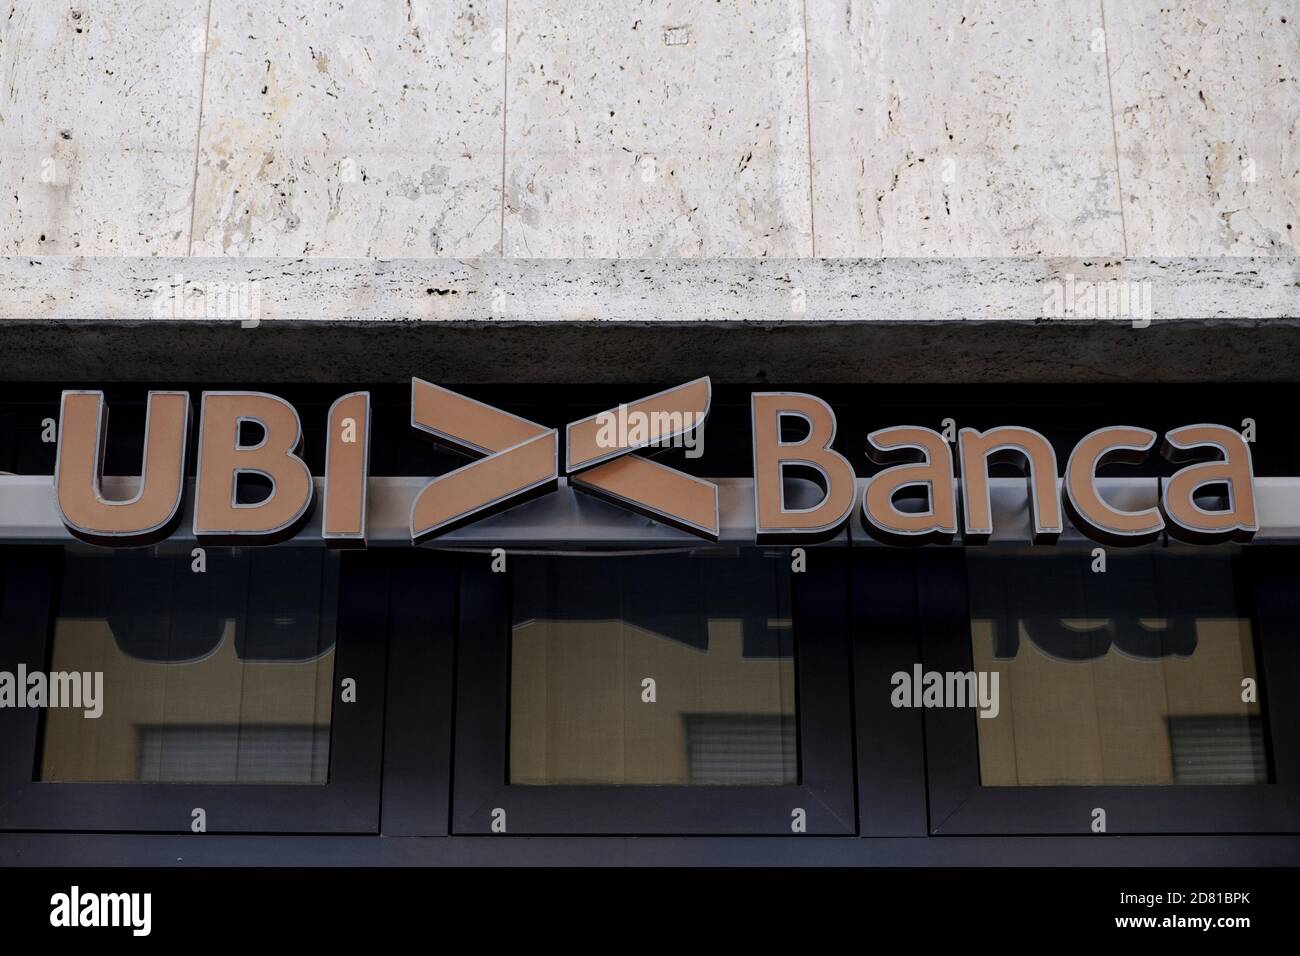 Italian Bank High Resolution Stock Photography And Images Alamy